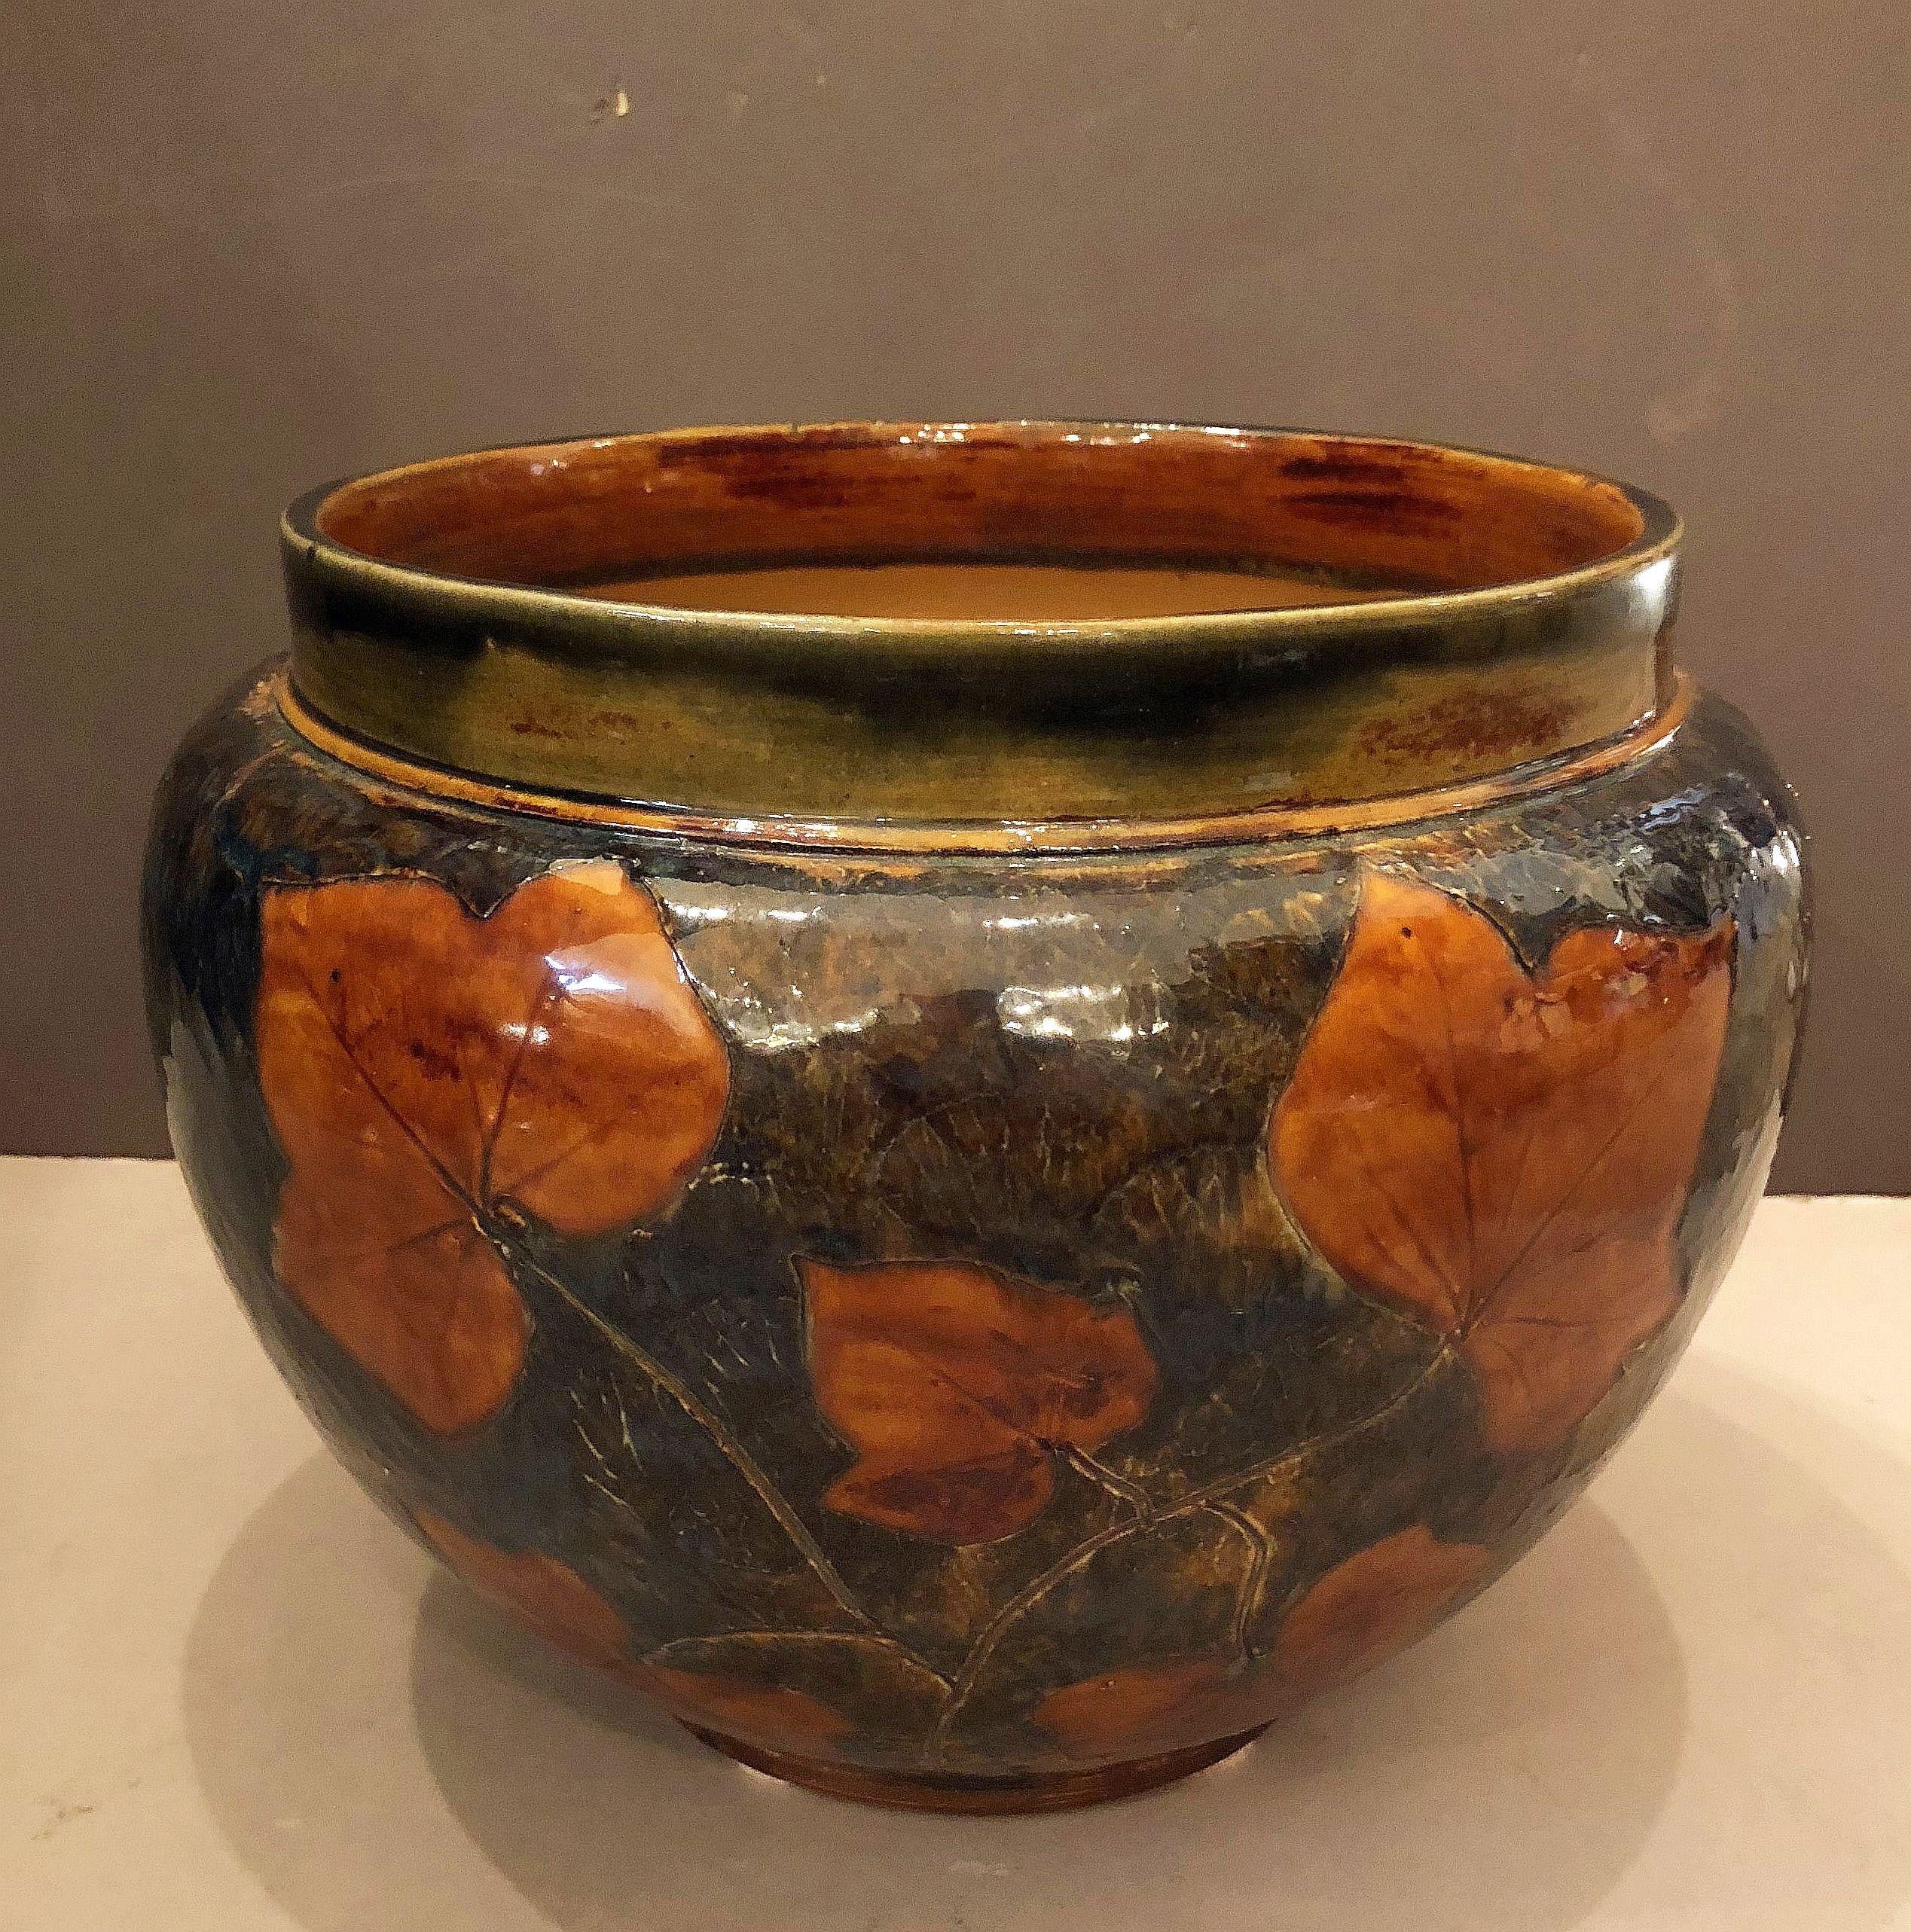 A fine English jardiniere or garden pot planter of salt-glazed stoneware pottery, from the Arts & Crafts era, by the celebrated art pottery firm, Royal Doulton.

Pattern known as Autumn Leaves.

Impressed marks to base: Royal Doulton mark and